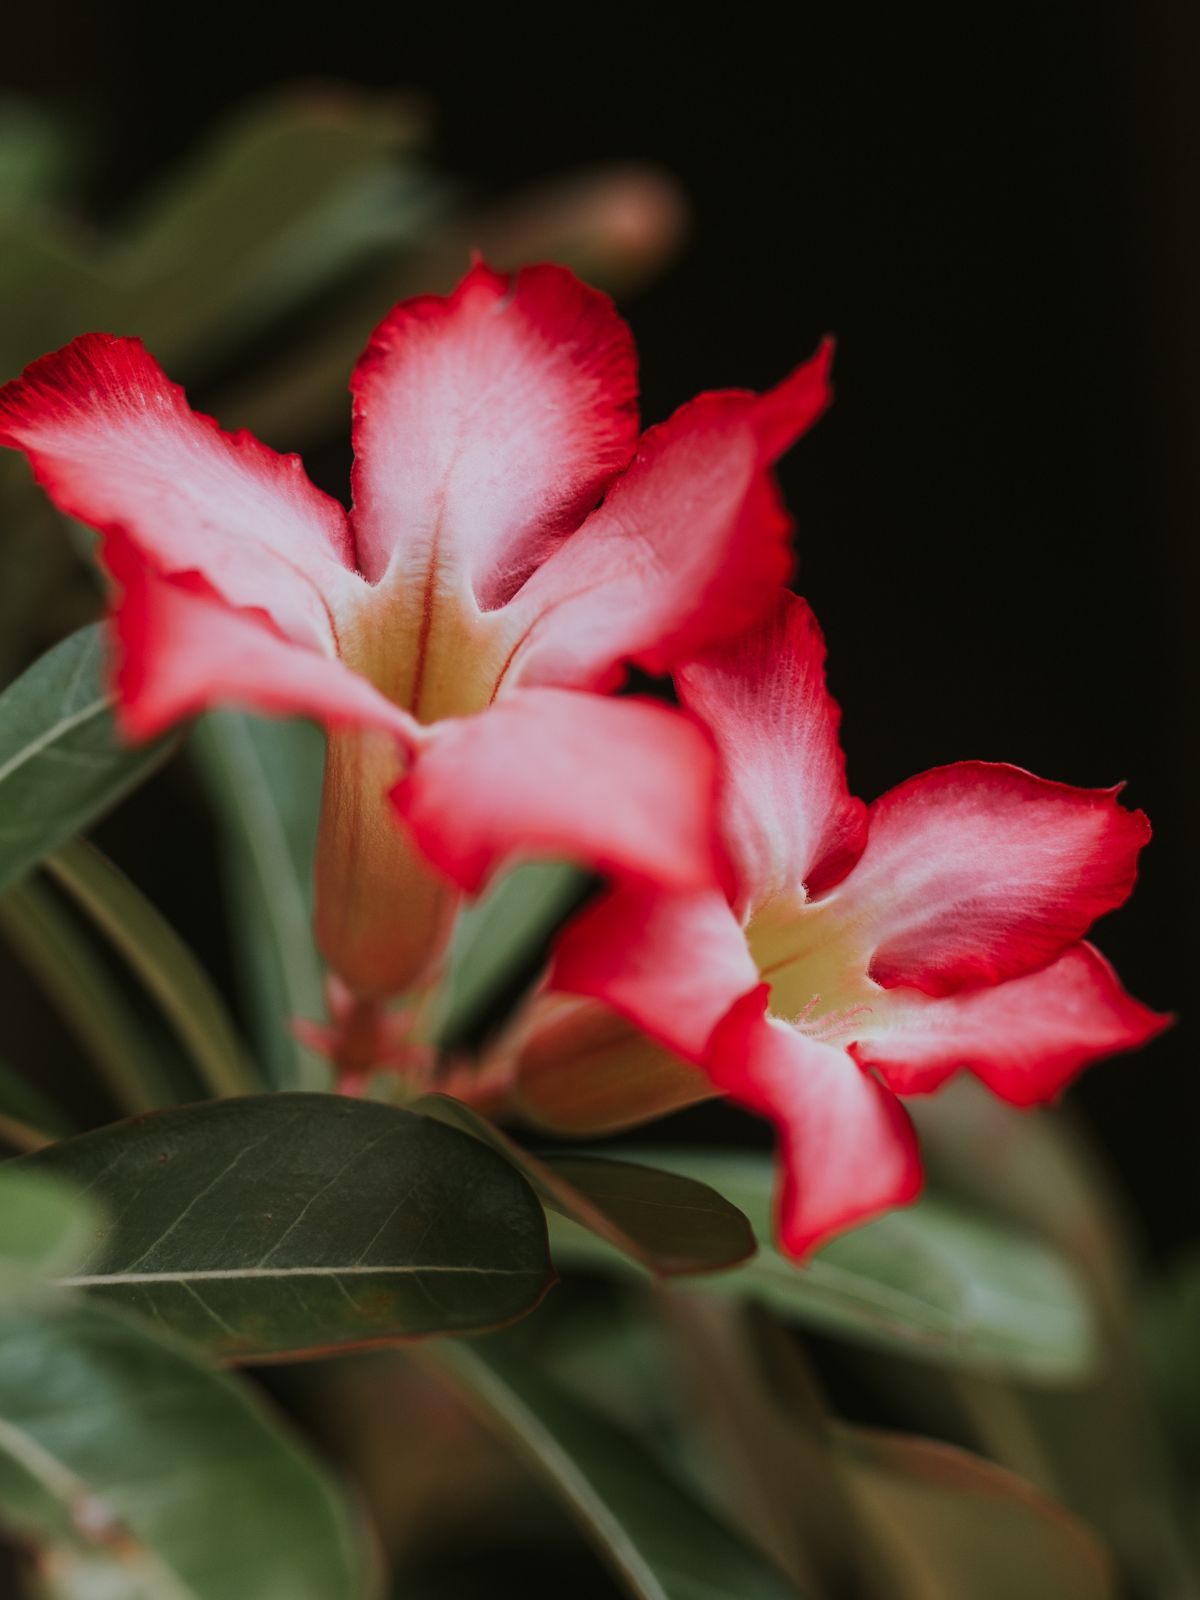 How to Grow and Care for a Desert Rose Plant